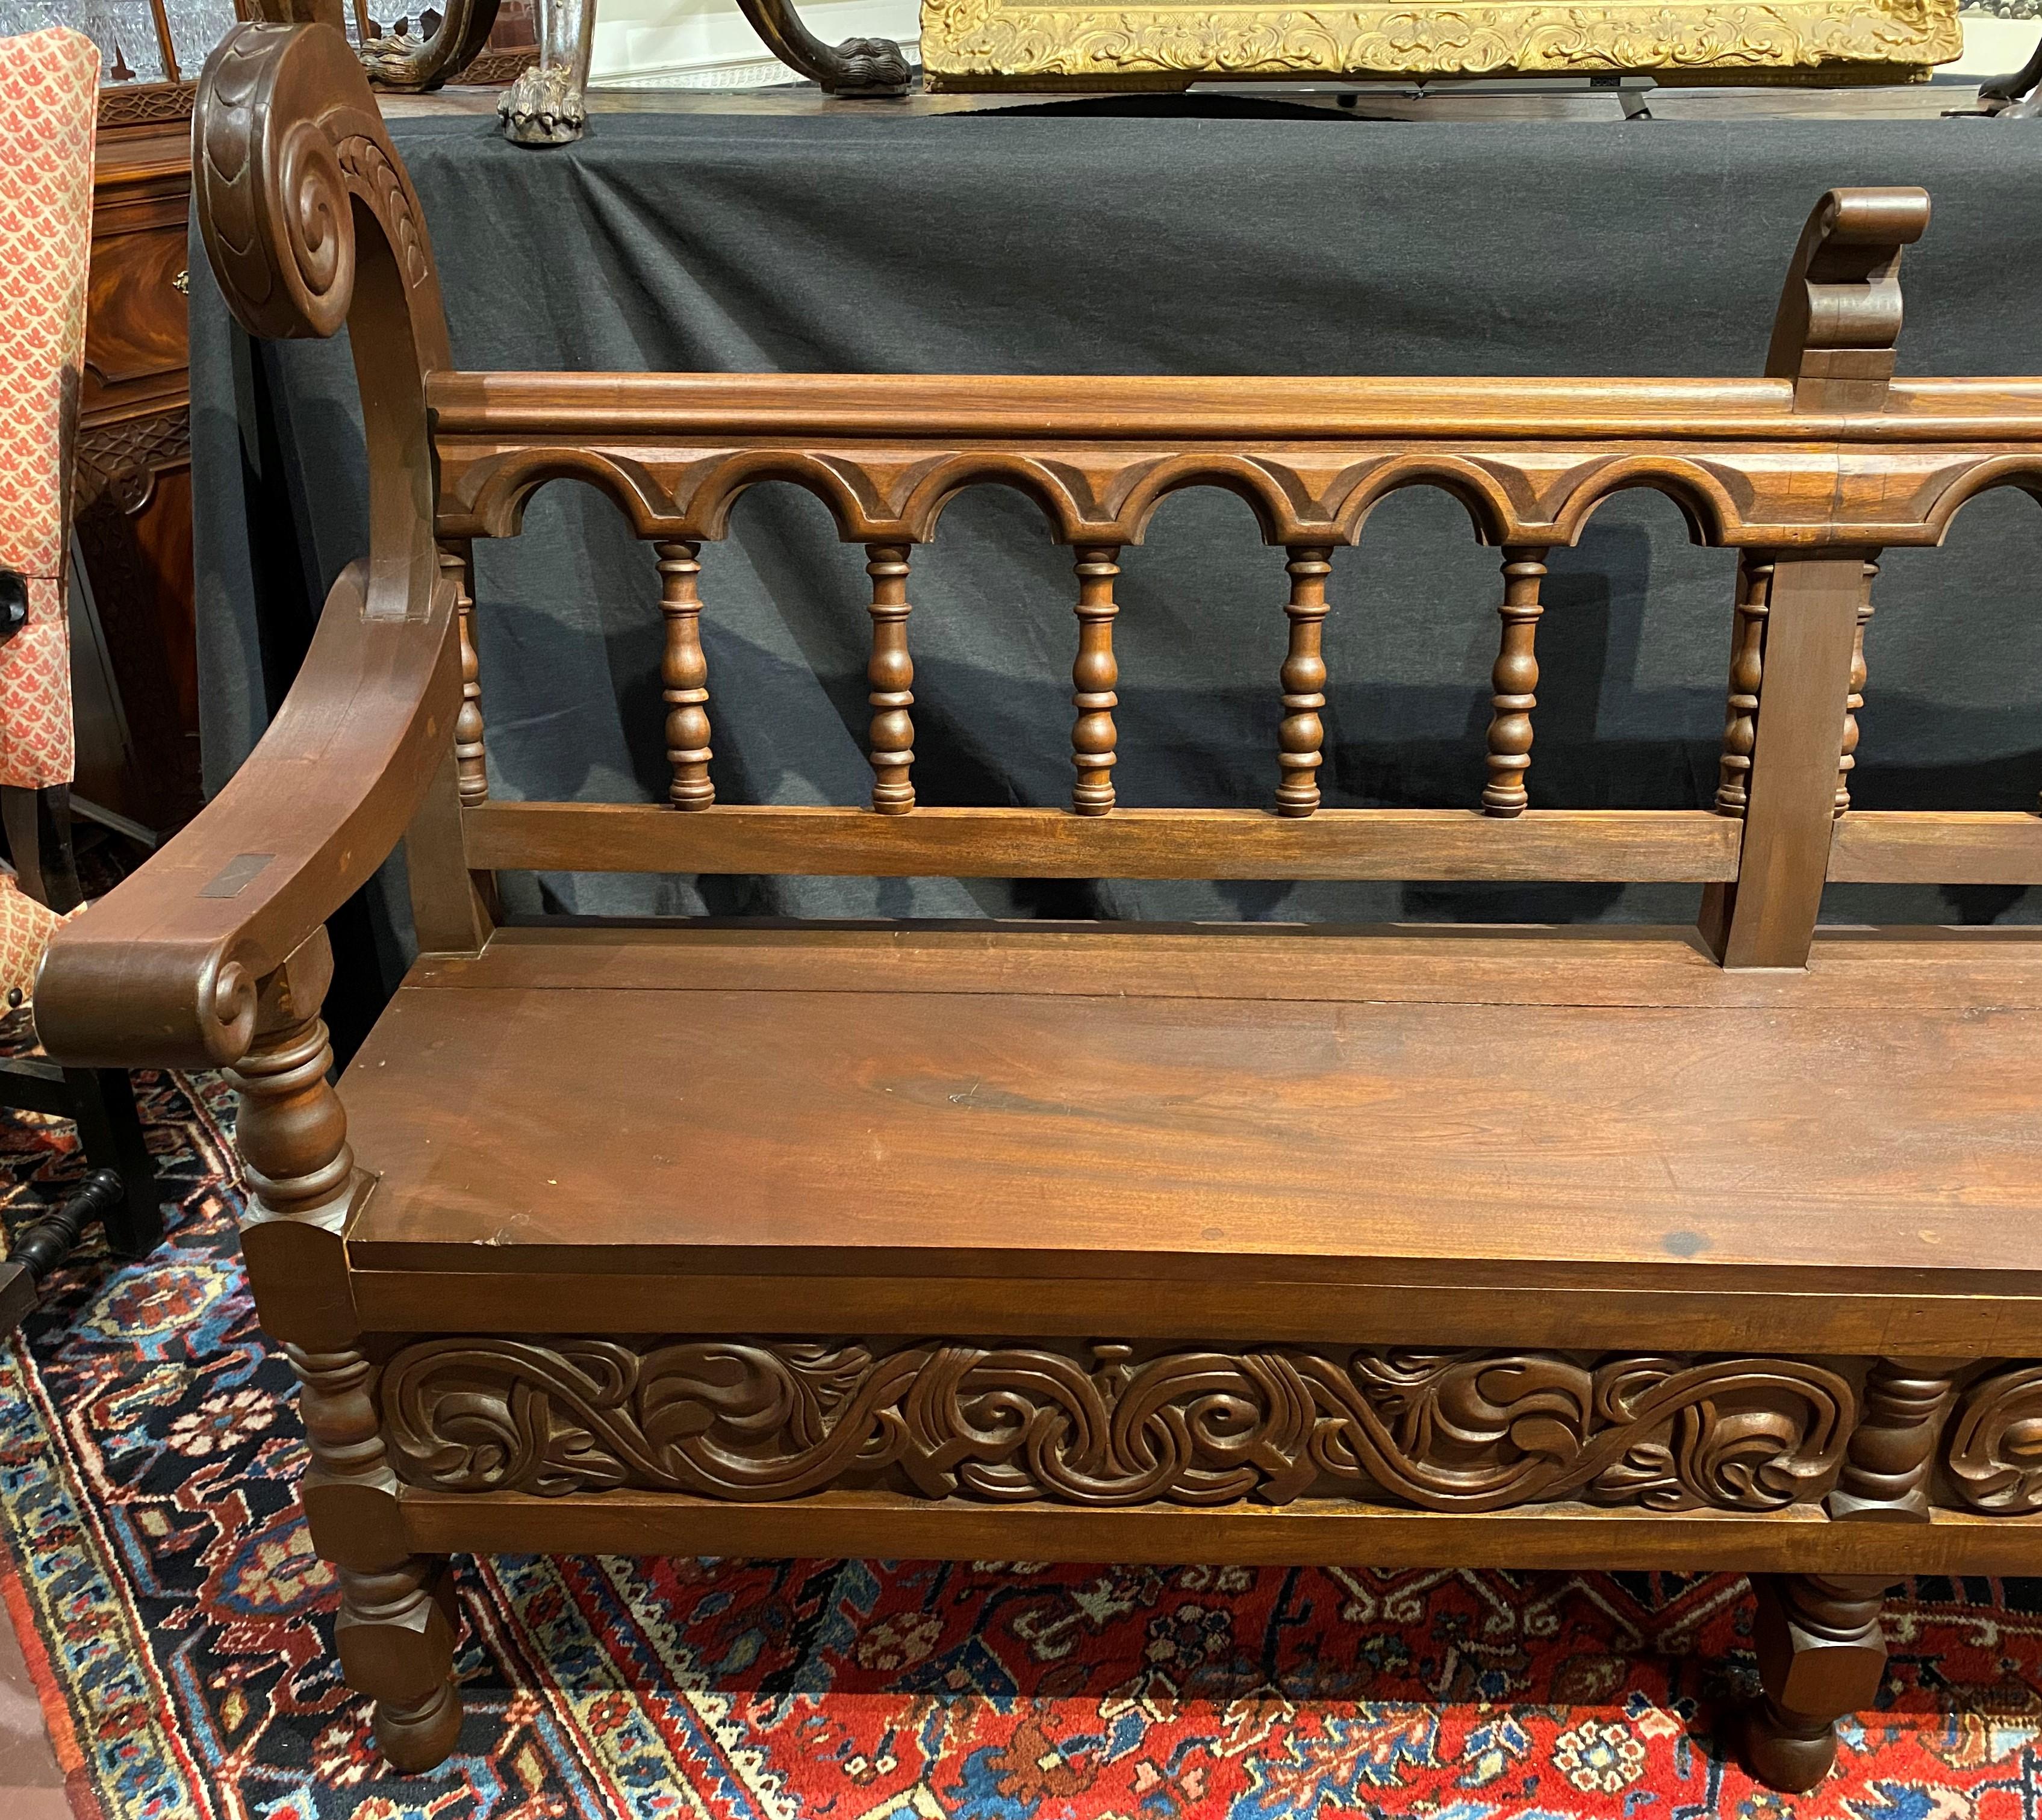 A beautifully detailed two thirds scale copy of an 18th century hand carved church pew from La Merced Cathedral in Antigua, Guatemala with scroll carved crest ends, arms, front panels, and side shield coat of arms panels, turned spindle backs, and